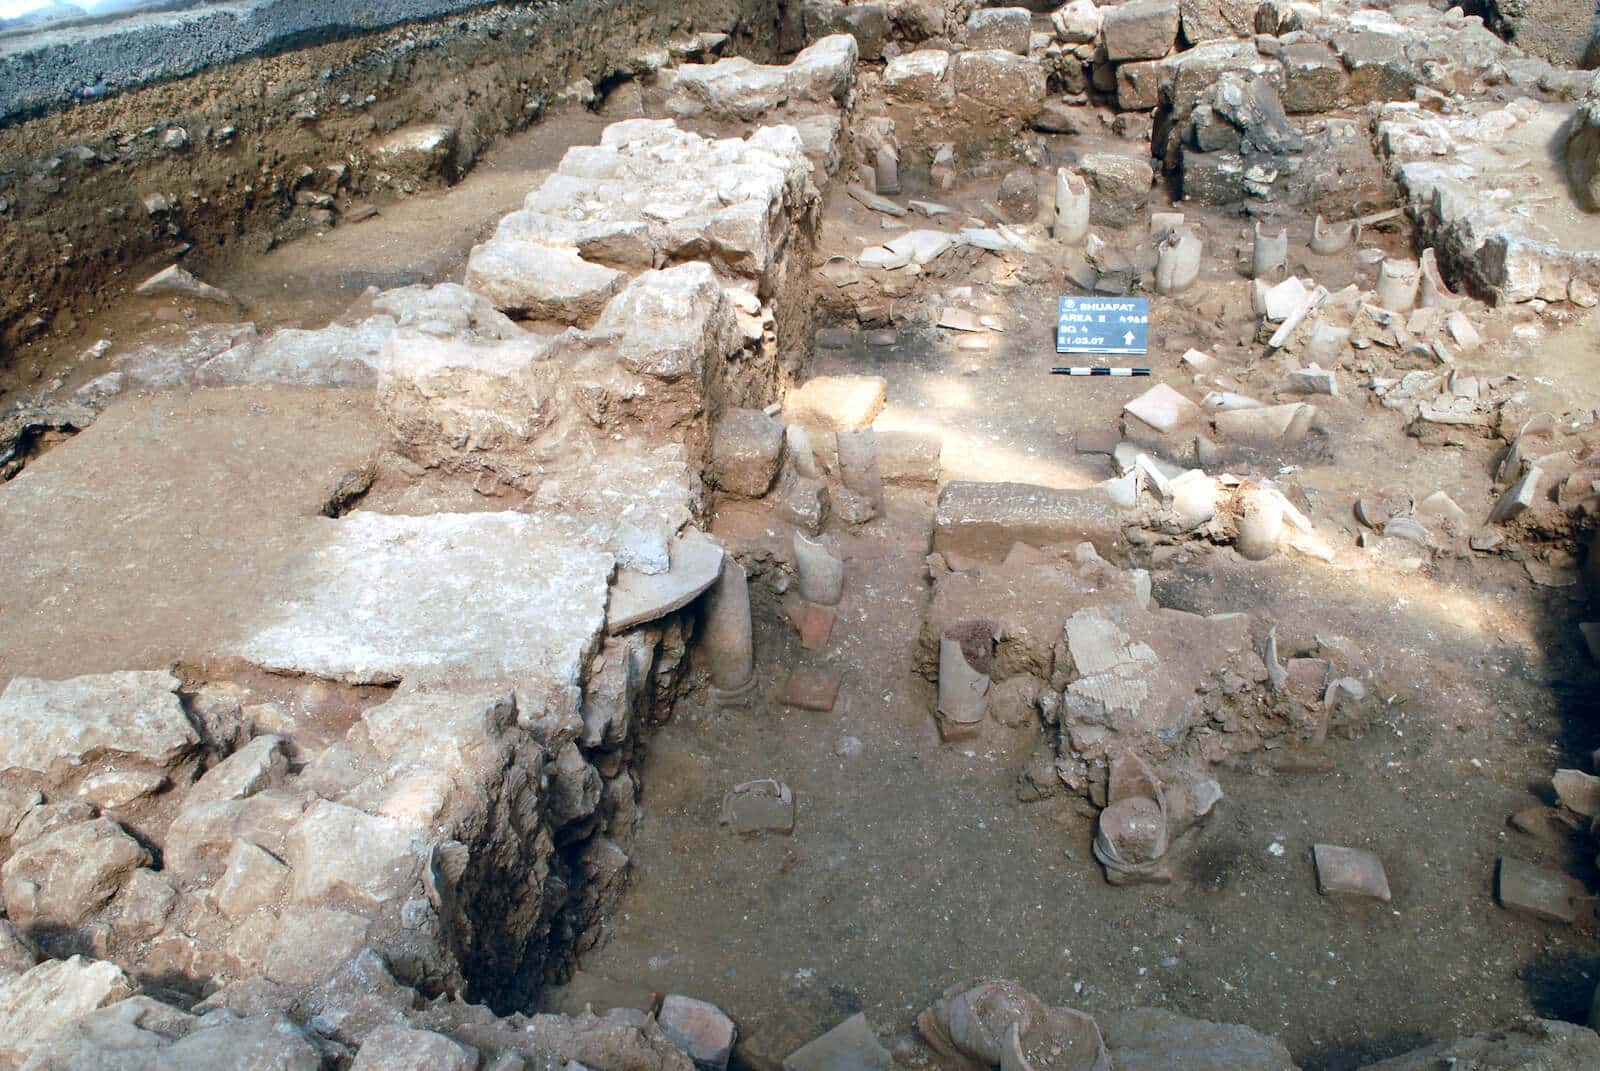 Hypocaust of the southern bathhouse in Shyafat during the excavations (looking north-northwest). Photo by T. Sagiv. Courtesy of the Israel Antiquities Authority